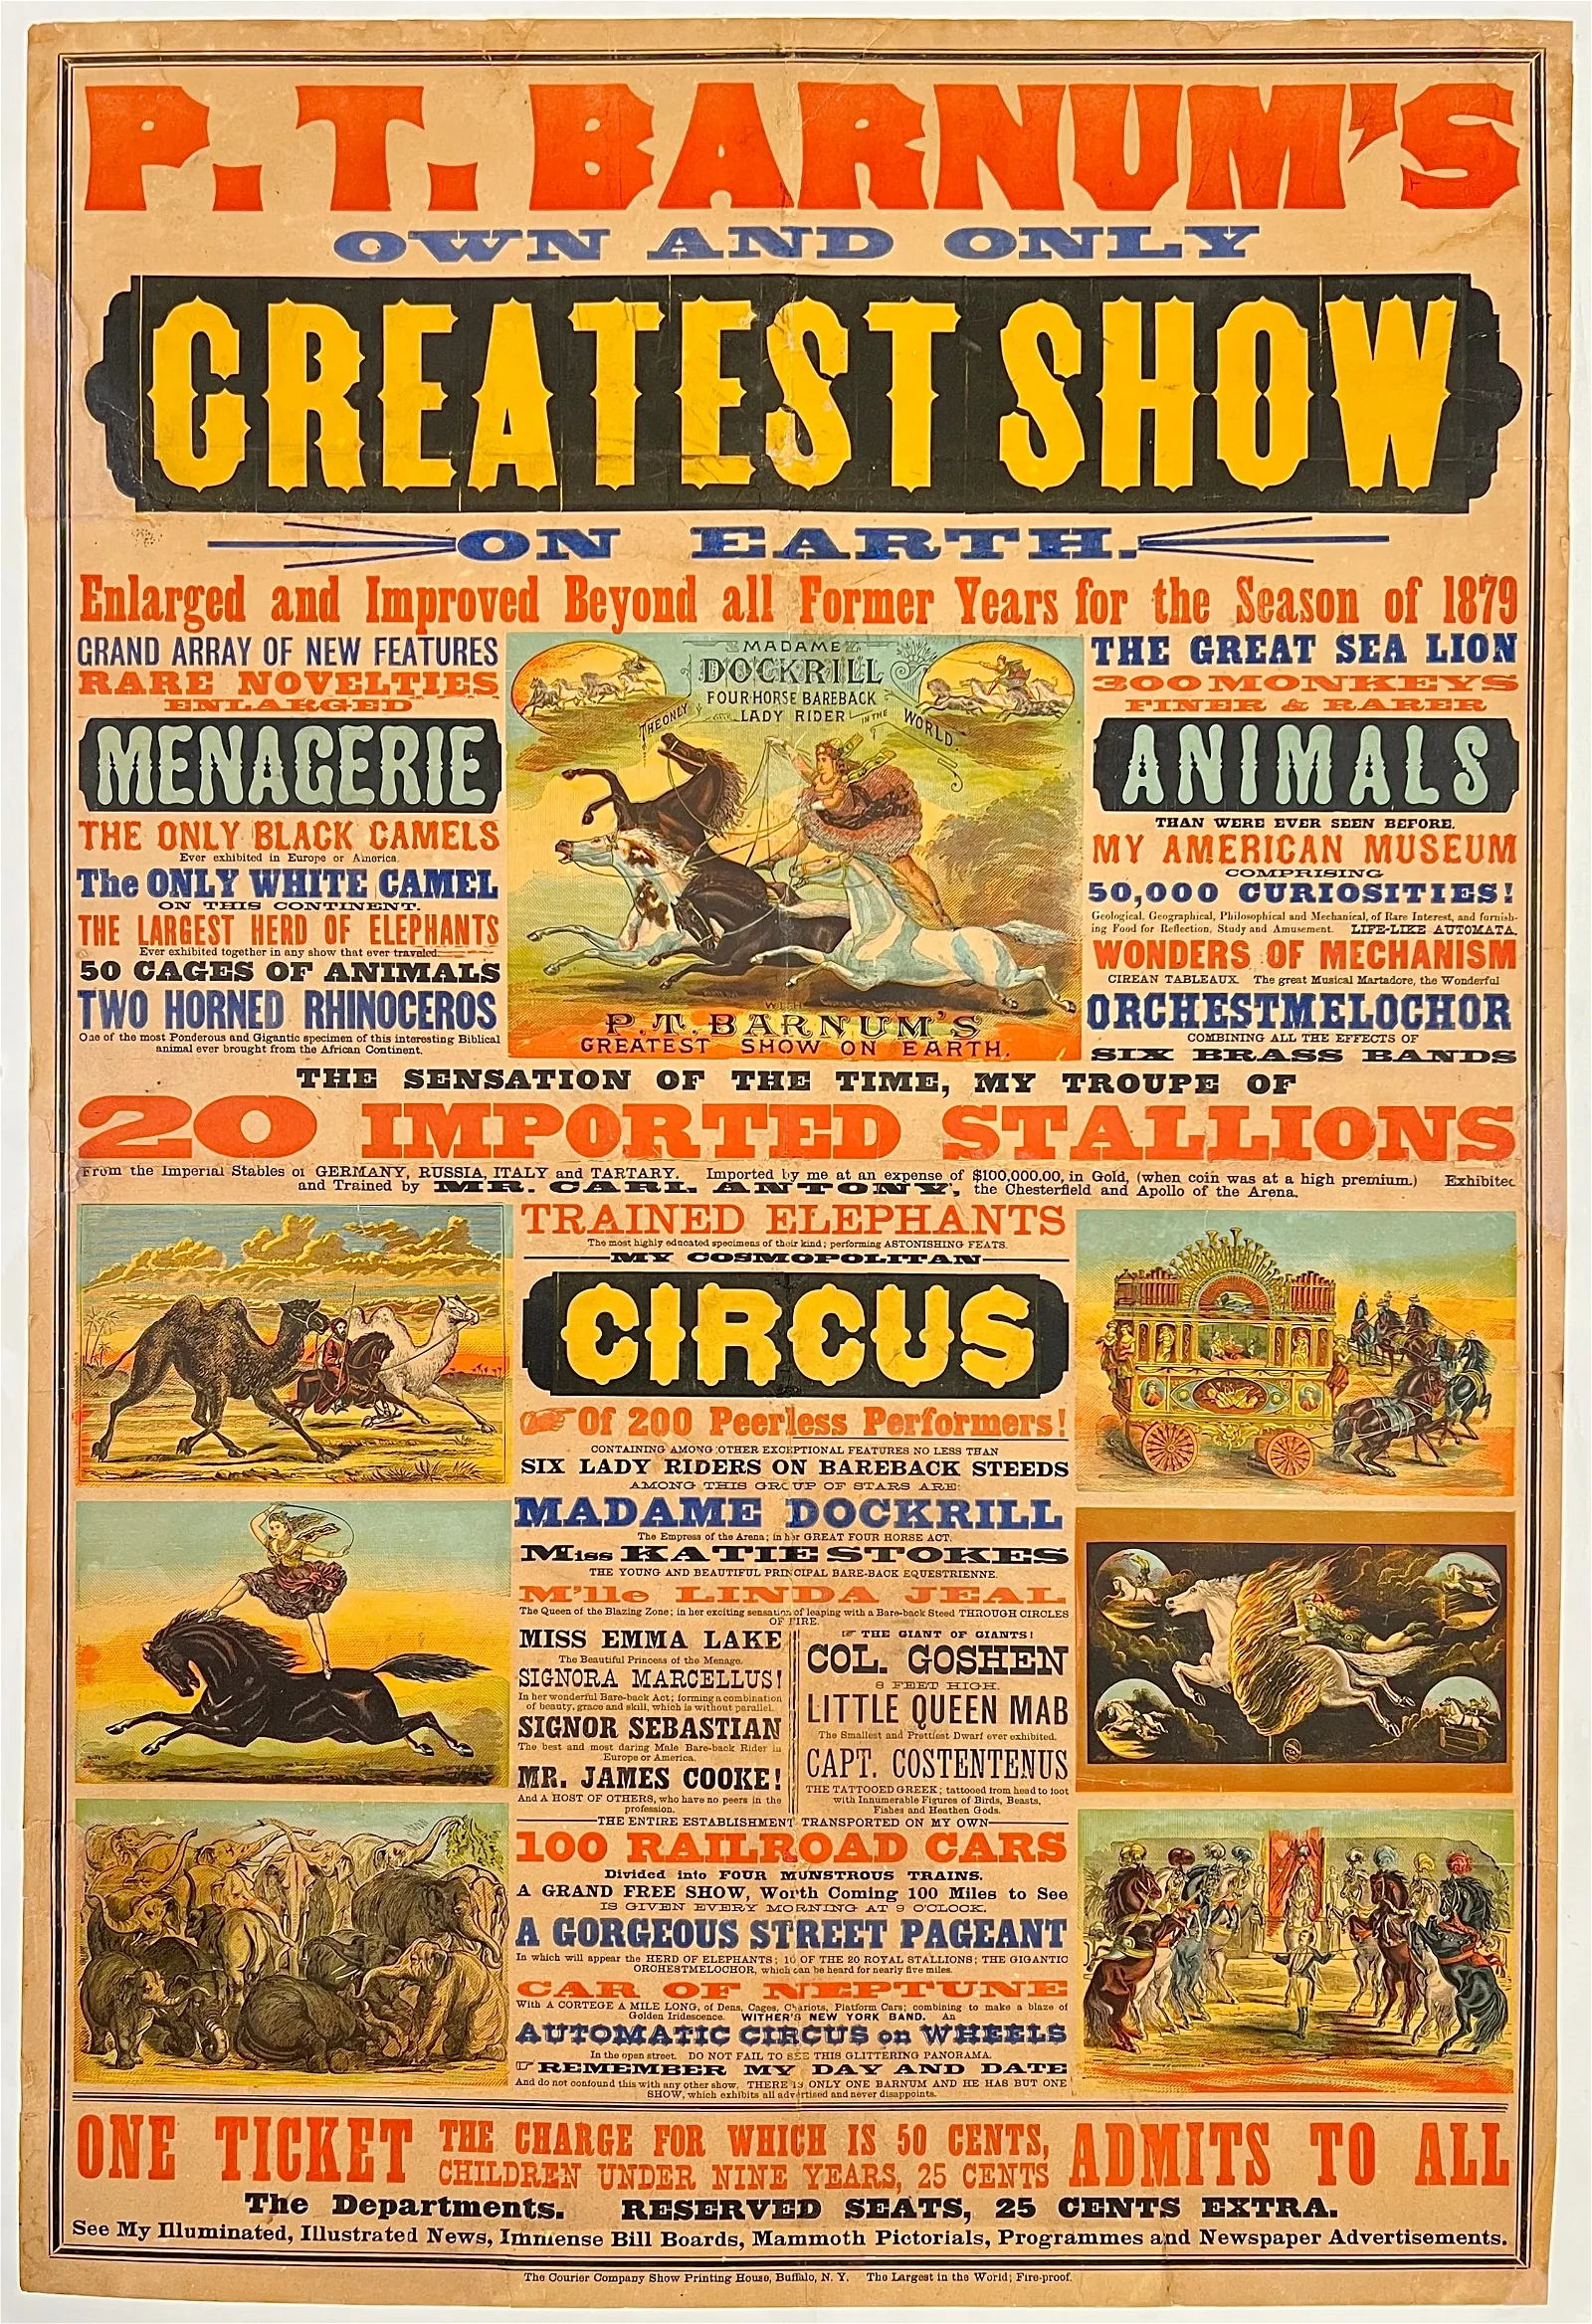 Vintage circus posters take top billing at Freedom Feb. 17